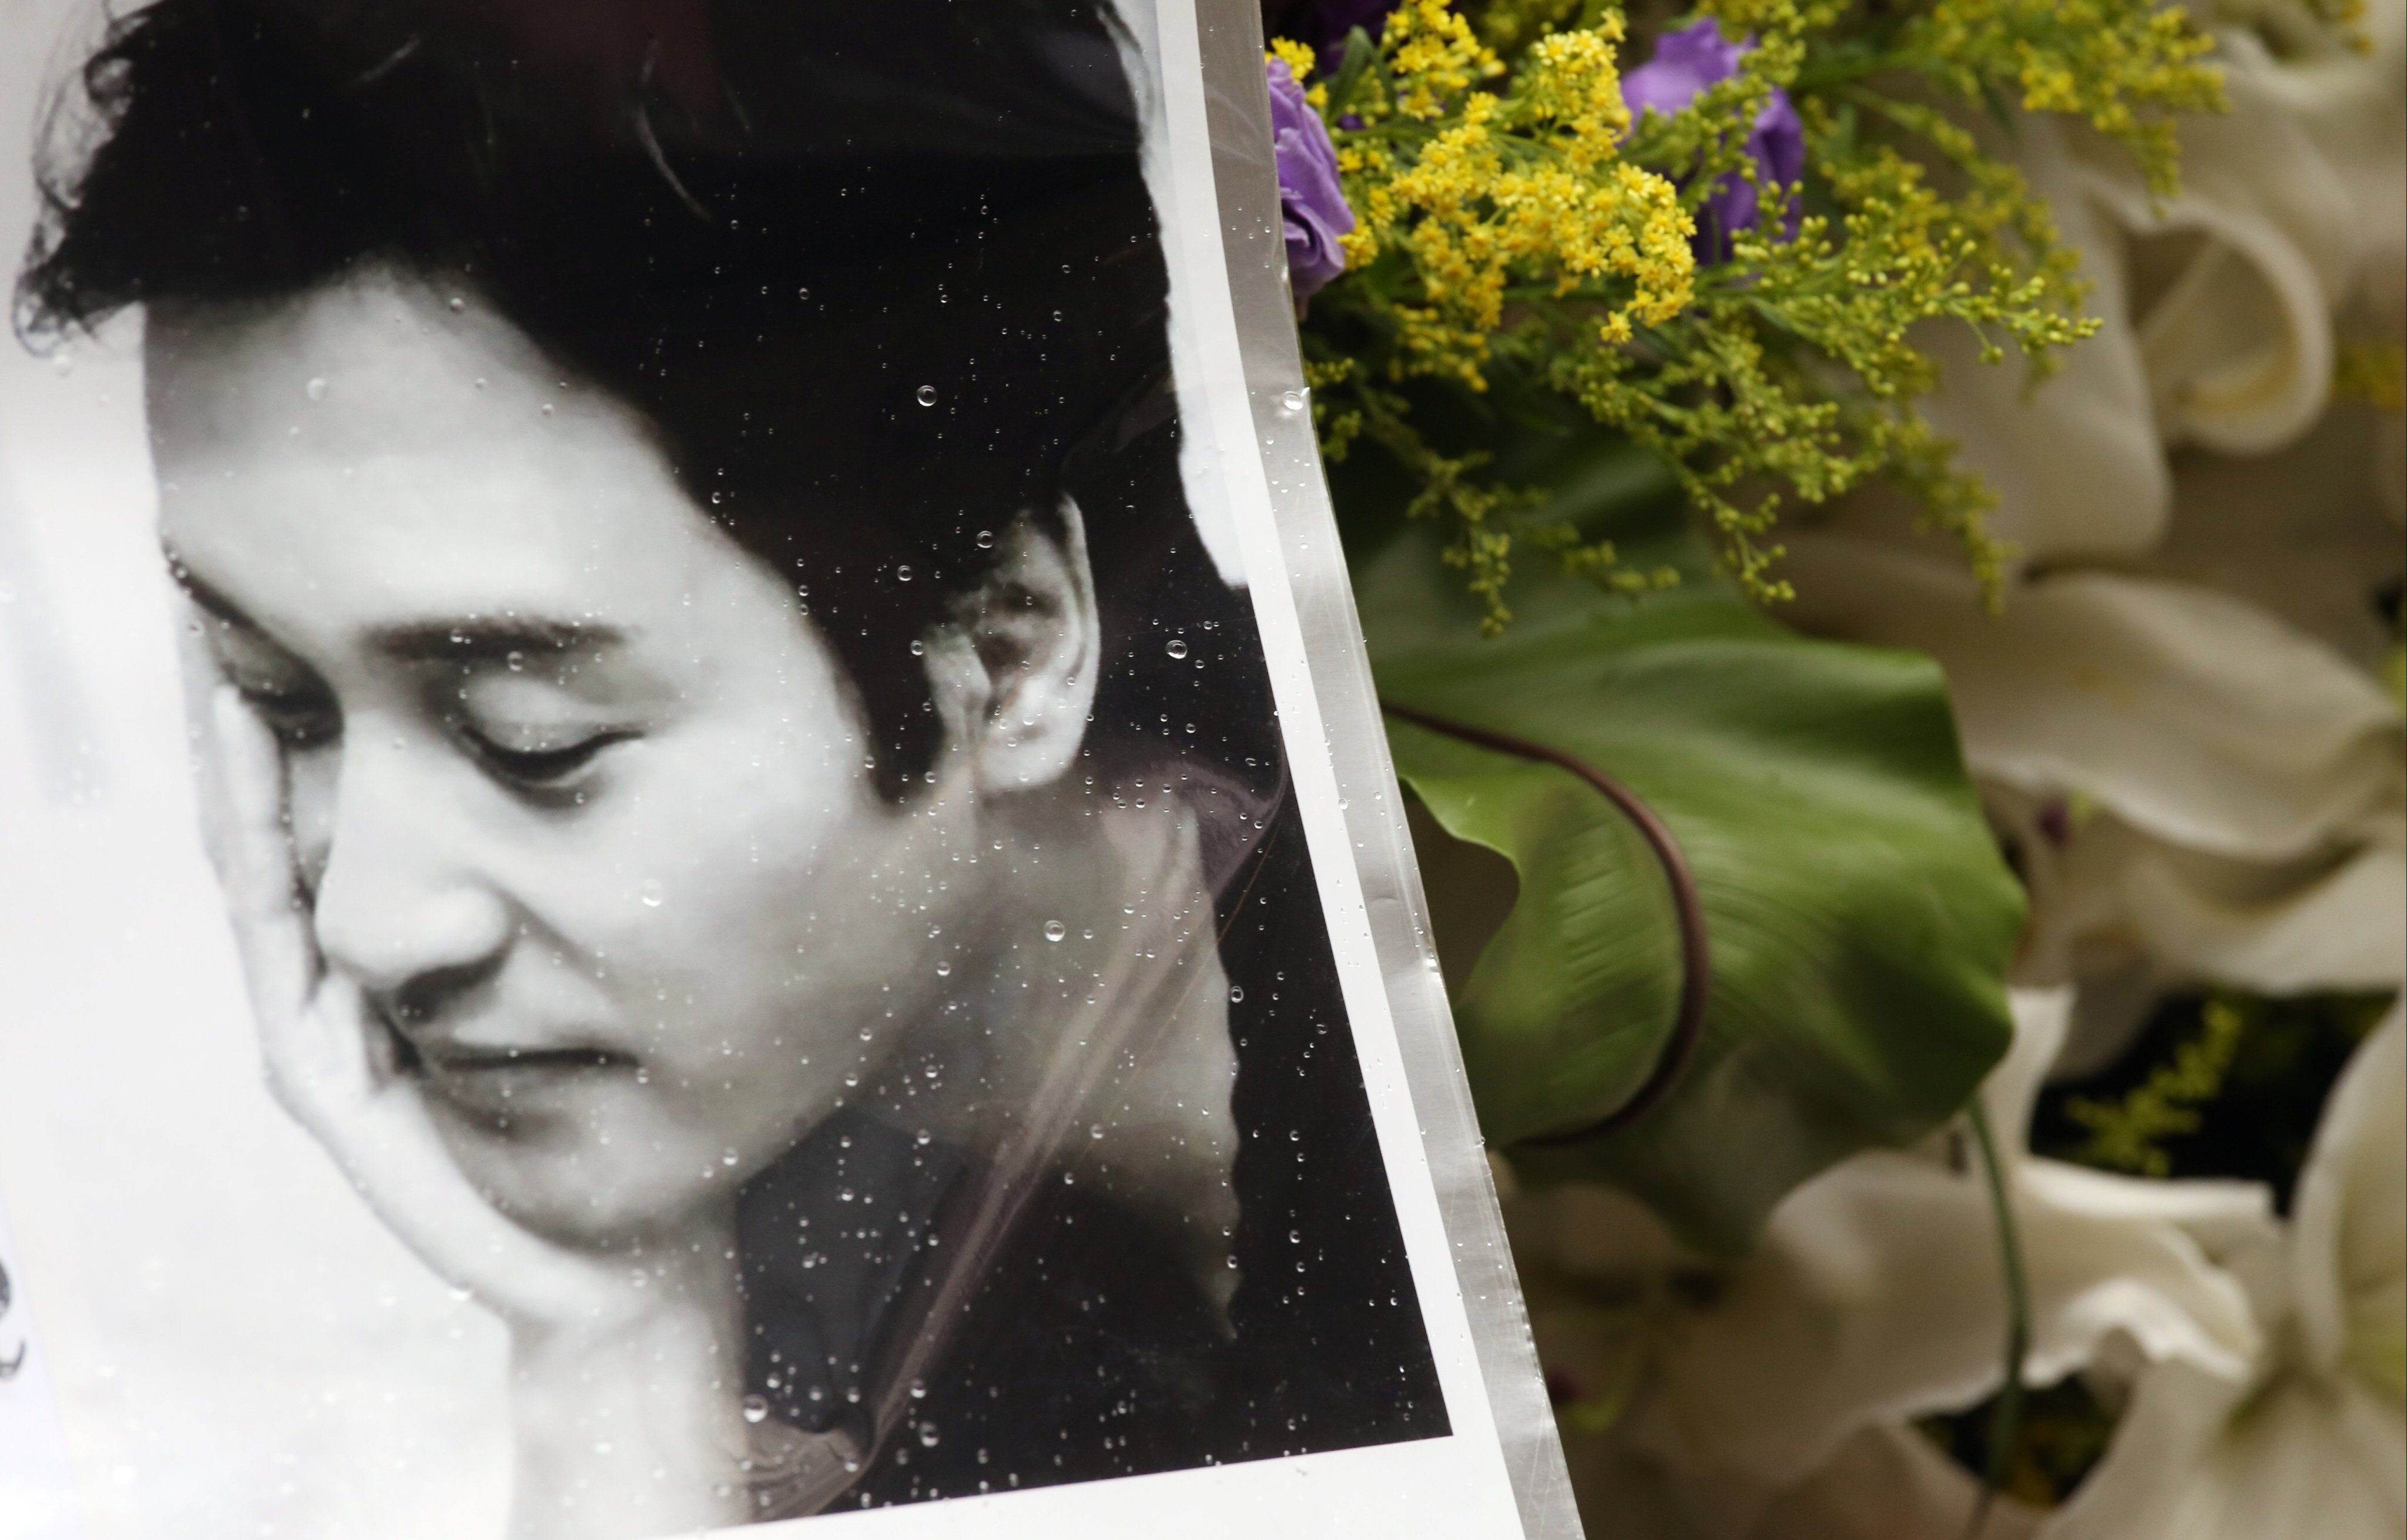 Fans of late Canto-pop singer Leslie Cheung offer wreaths outside the Mandarin Oriental hotel in Central, Hong Kong on the anniversary of his death on April 1, 2014. Photo: K. Y. Cheng